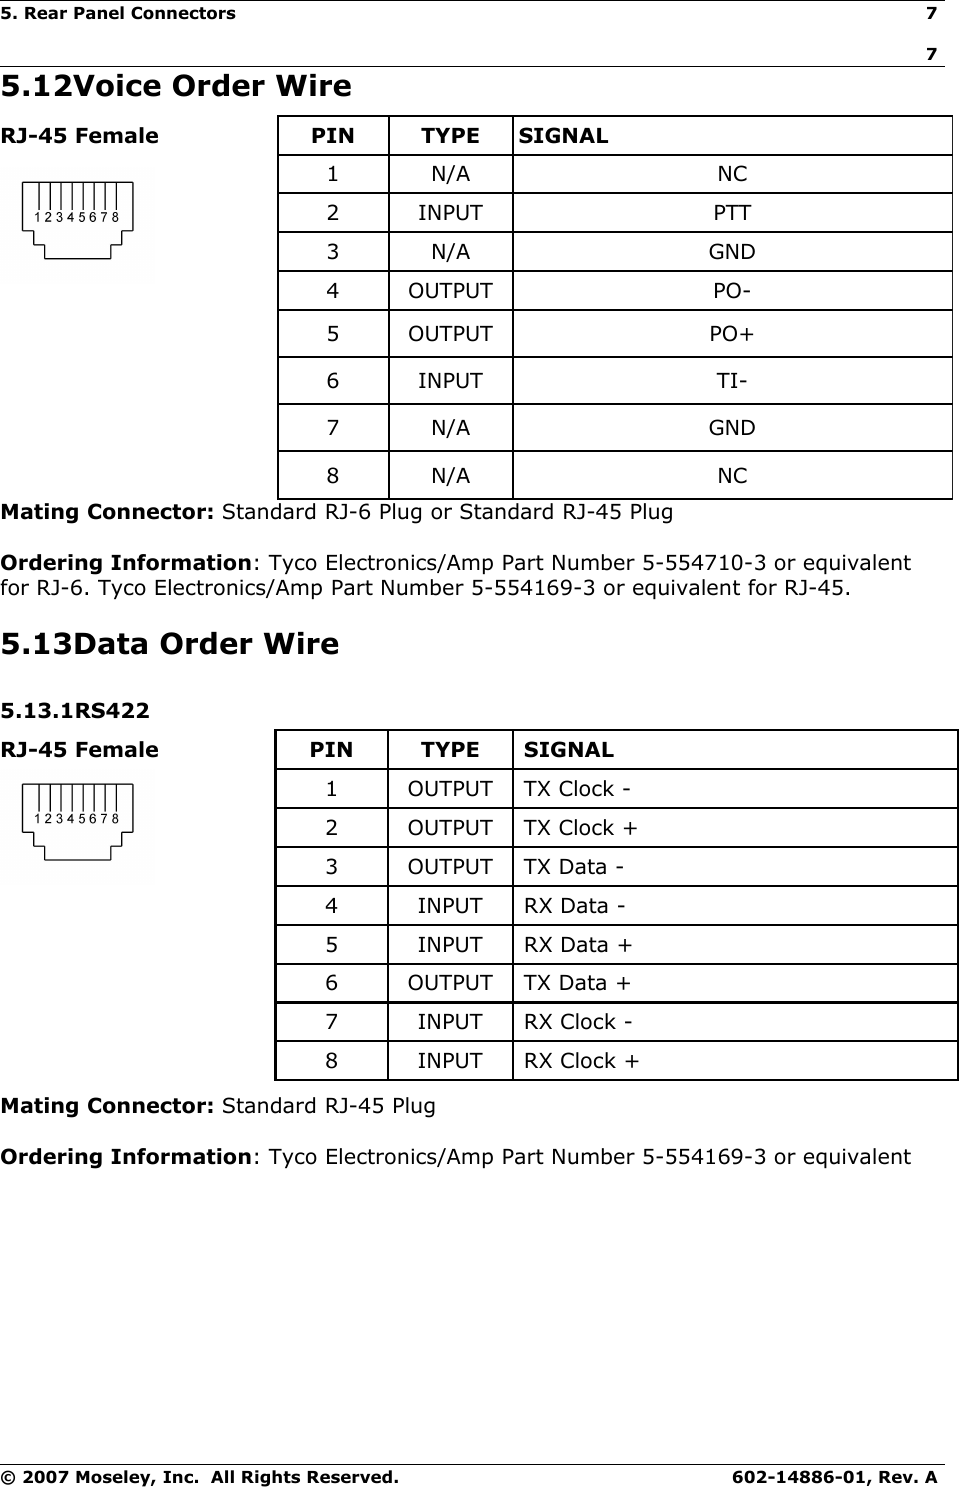 5. Rear Panel Connectors 775.12Voice Order WireMating Connector: Standard RJ-6 Plug or Standard RJ-45 PlugOrdering Information: Tyco Electronics/Amp Part Number 5-554710-3 or equivalent for RJ-6. Tyco Electronics/Amp Part Number 5-554169-3 or equivalent for RJ-45.5.13Data Order Wire5.13.1RS422RJ-45 Female PIN TYPE SIGNAL1 OUTPUT TX Clock -2 OUTPUT TX Clock +3 OUTPUT TX Data -4 INPUT RX Data -5 INPUT RX Data +6 OUTPUT TX Data +7 INPUT RX Clock -8 INPUT RX Clock +Mating Connector: Standard RJ-45 PlugOrdering Information: Tyco Electronics/Amp Part Number 5-554169-3 or equivalent© 2007 Moseley, Inc.  All Rights Reserved. 602-14886-01, Rev. ARJ-45 Female PIN TYPE SIGNAL1 N/A NC2 INPUT PTT3 N/A GND4 OUTPUT PO-5 OUTPUT PO+6 INPUT TI-7 N/A GND8 N/A NC